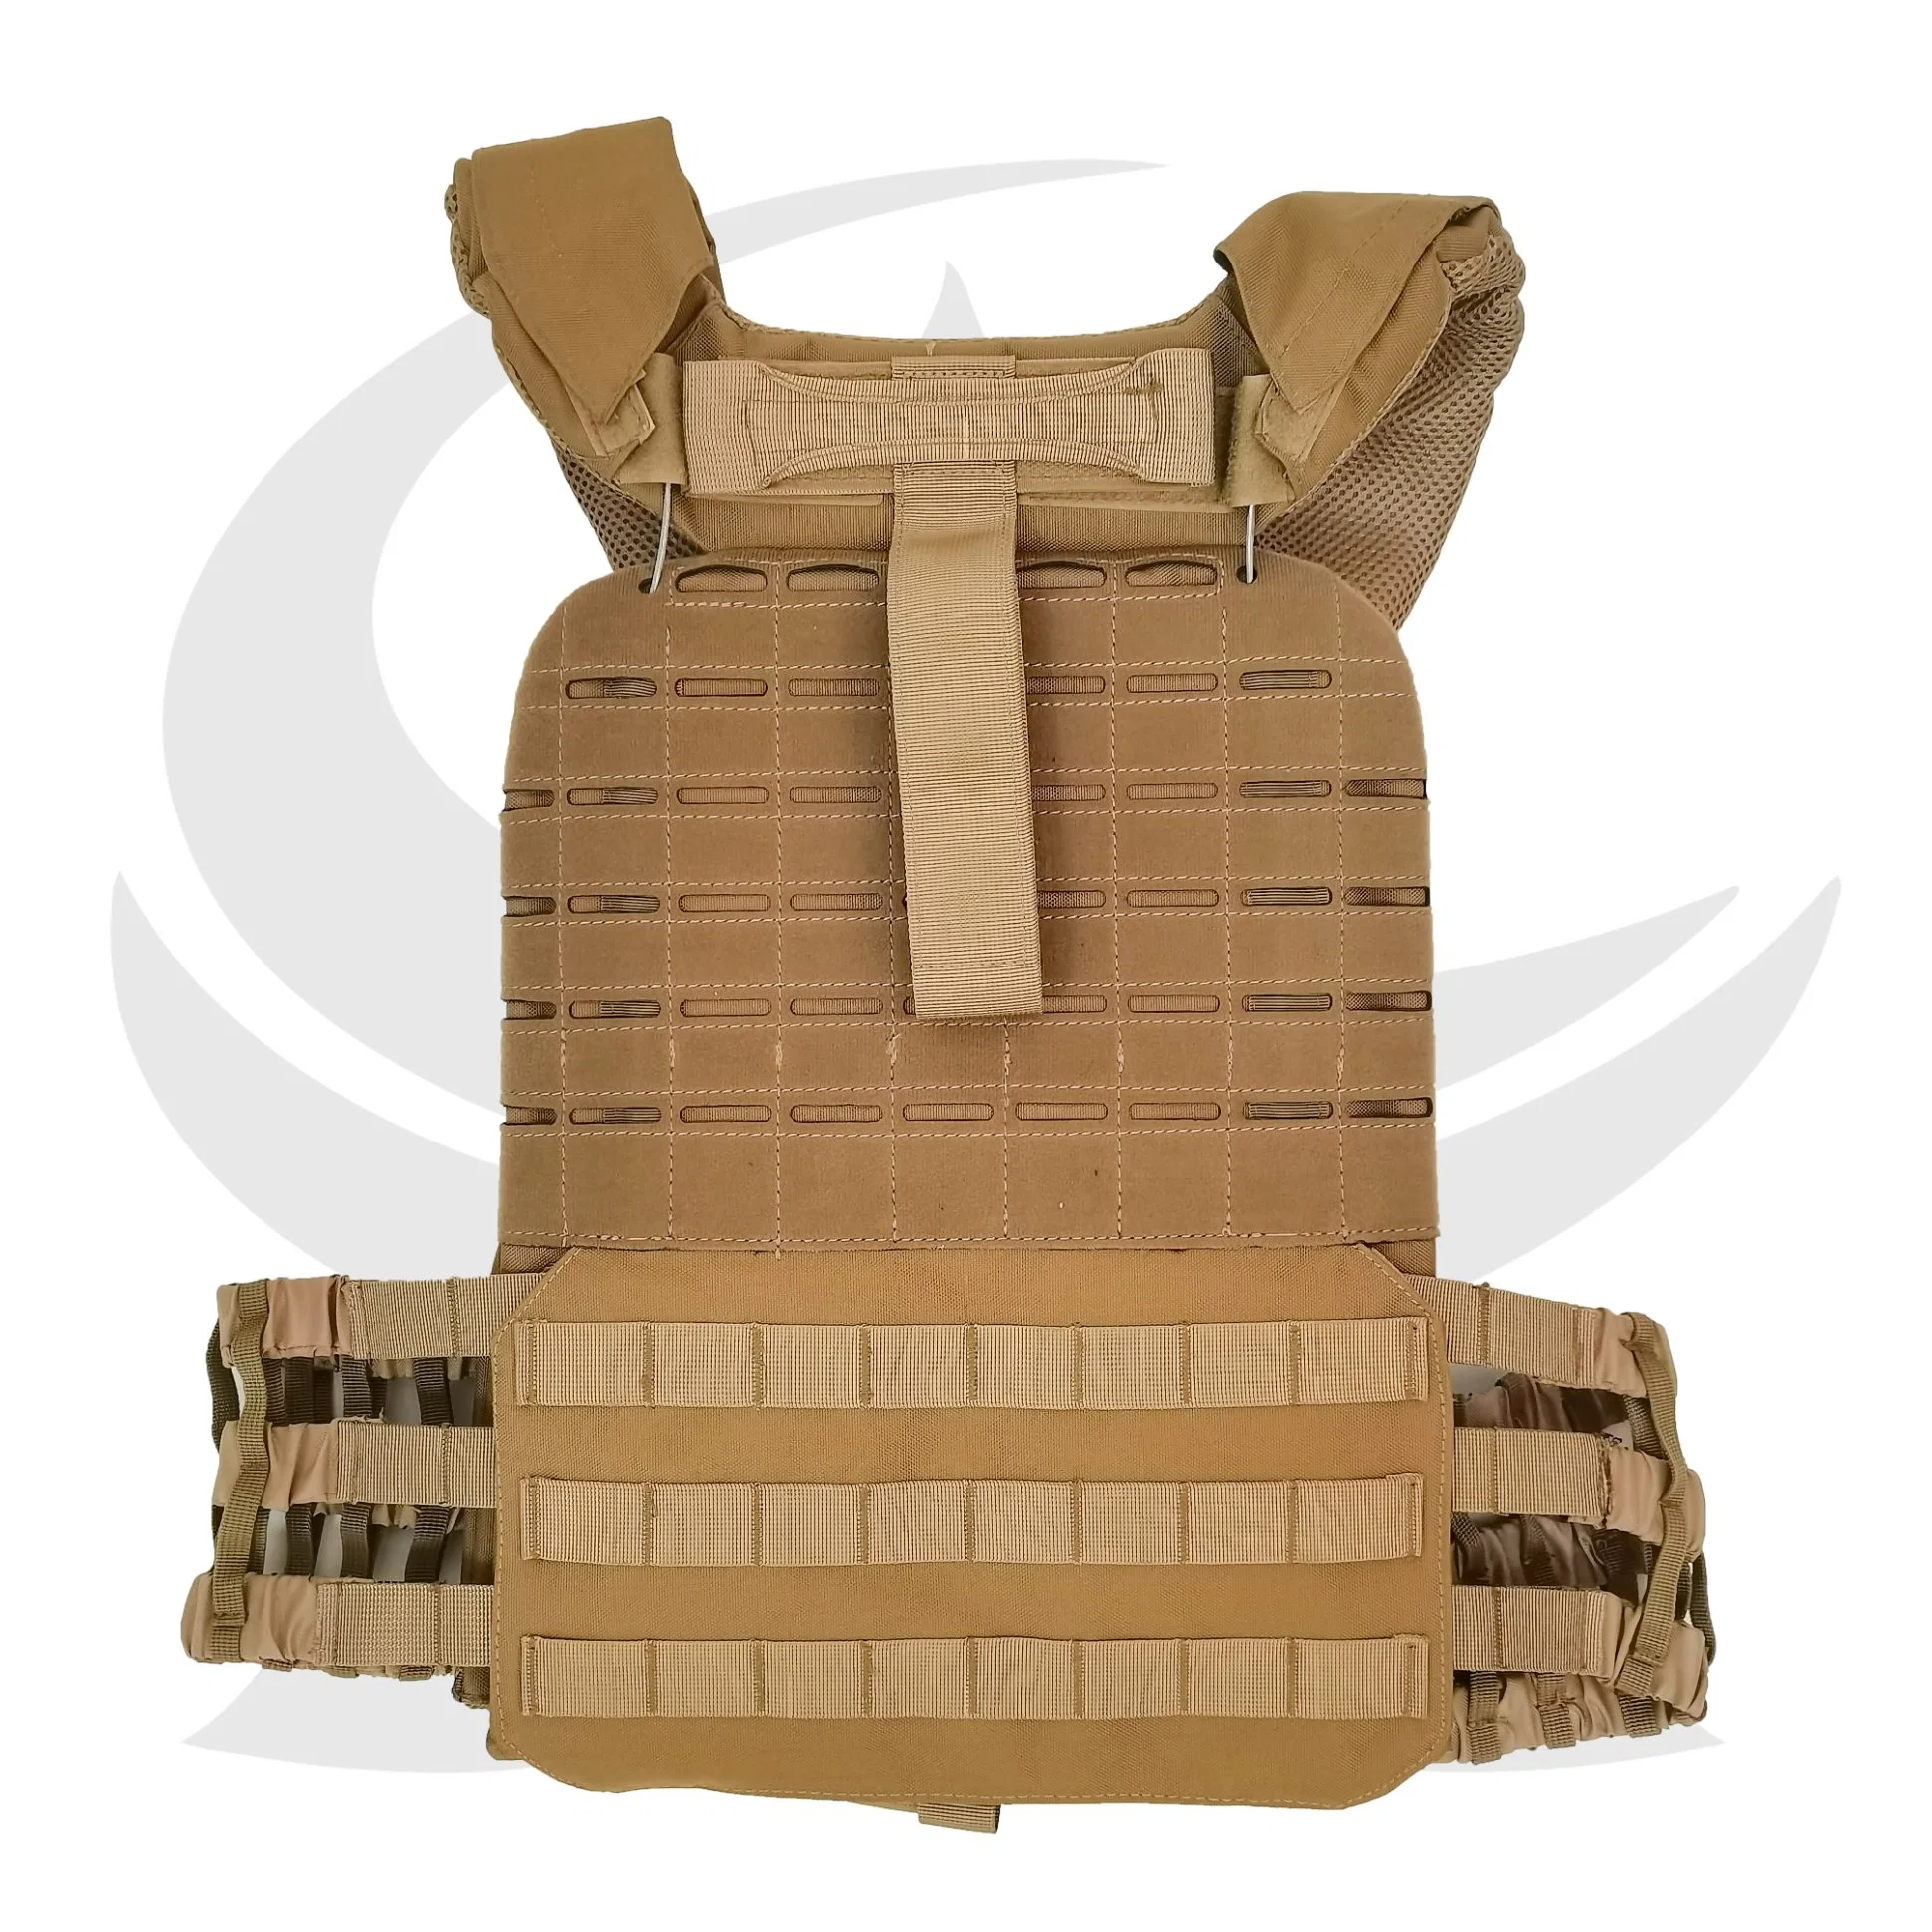 Gaf Military Style Tactical Style Vest Jacket Onboard Army Style Training Stab Resistant Vest